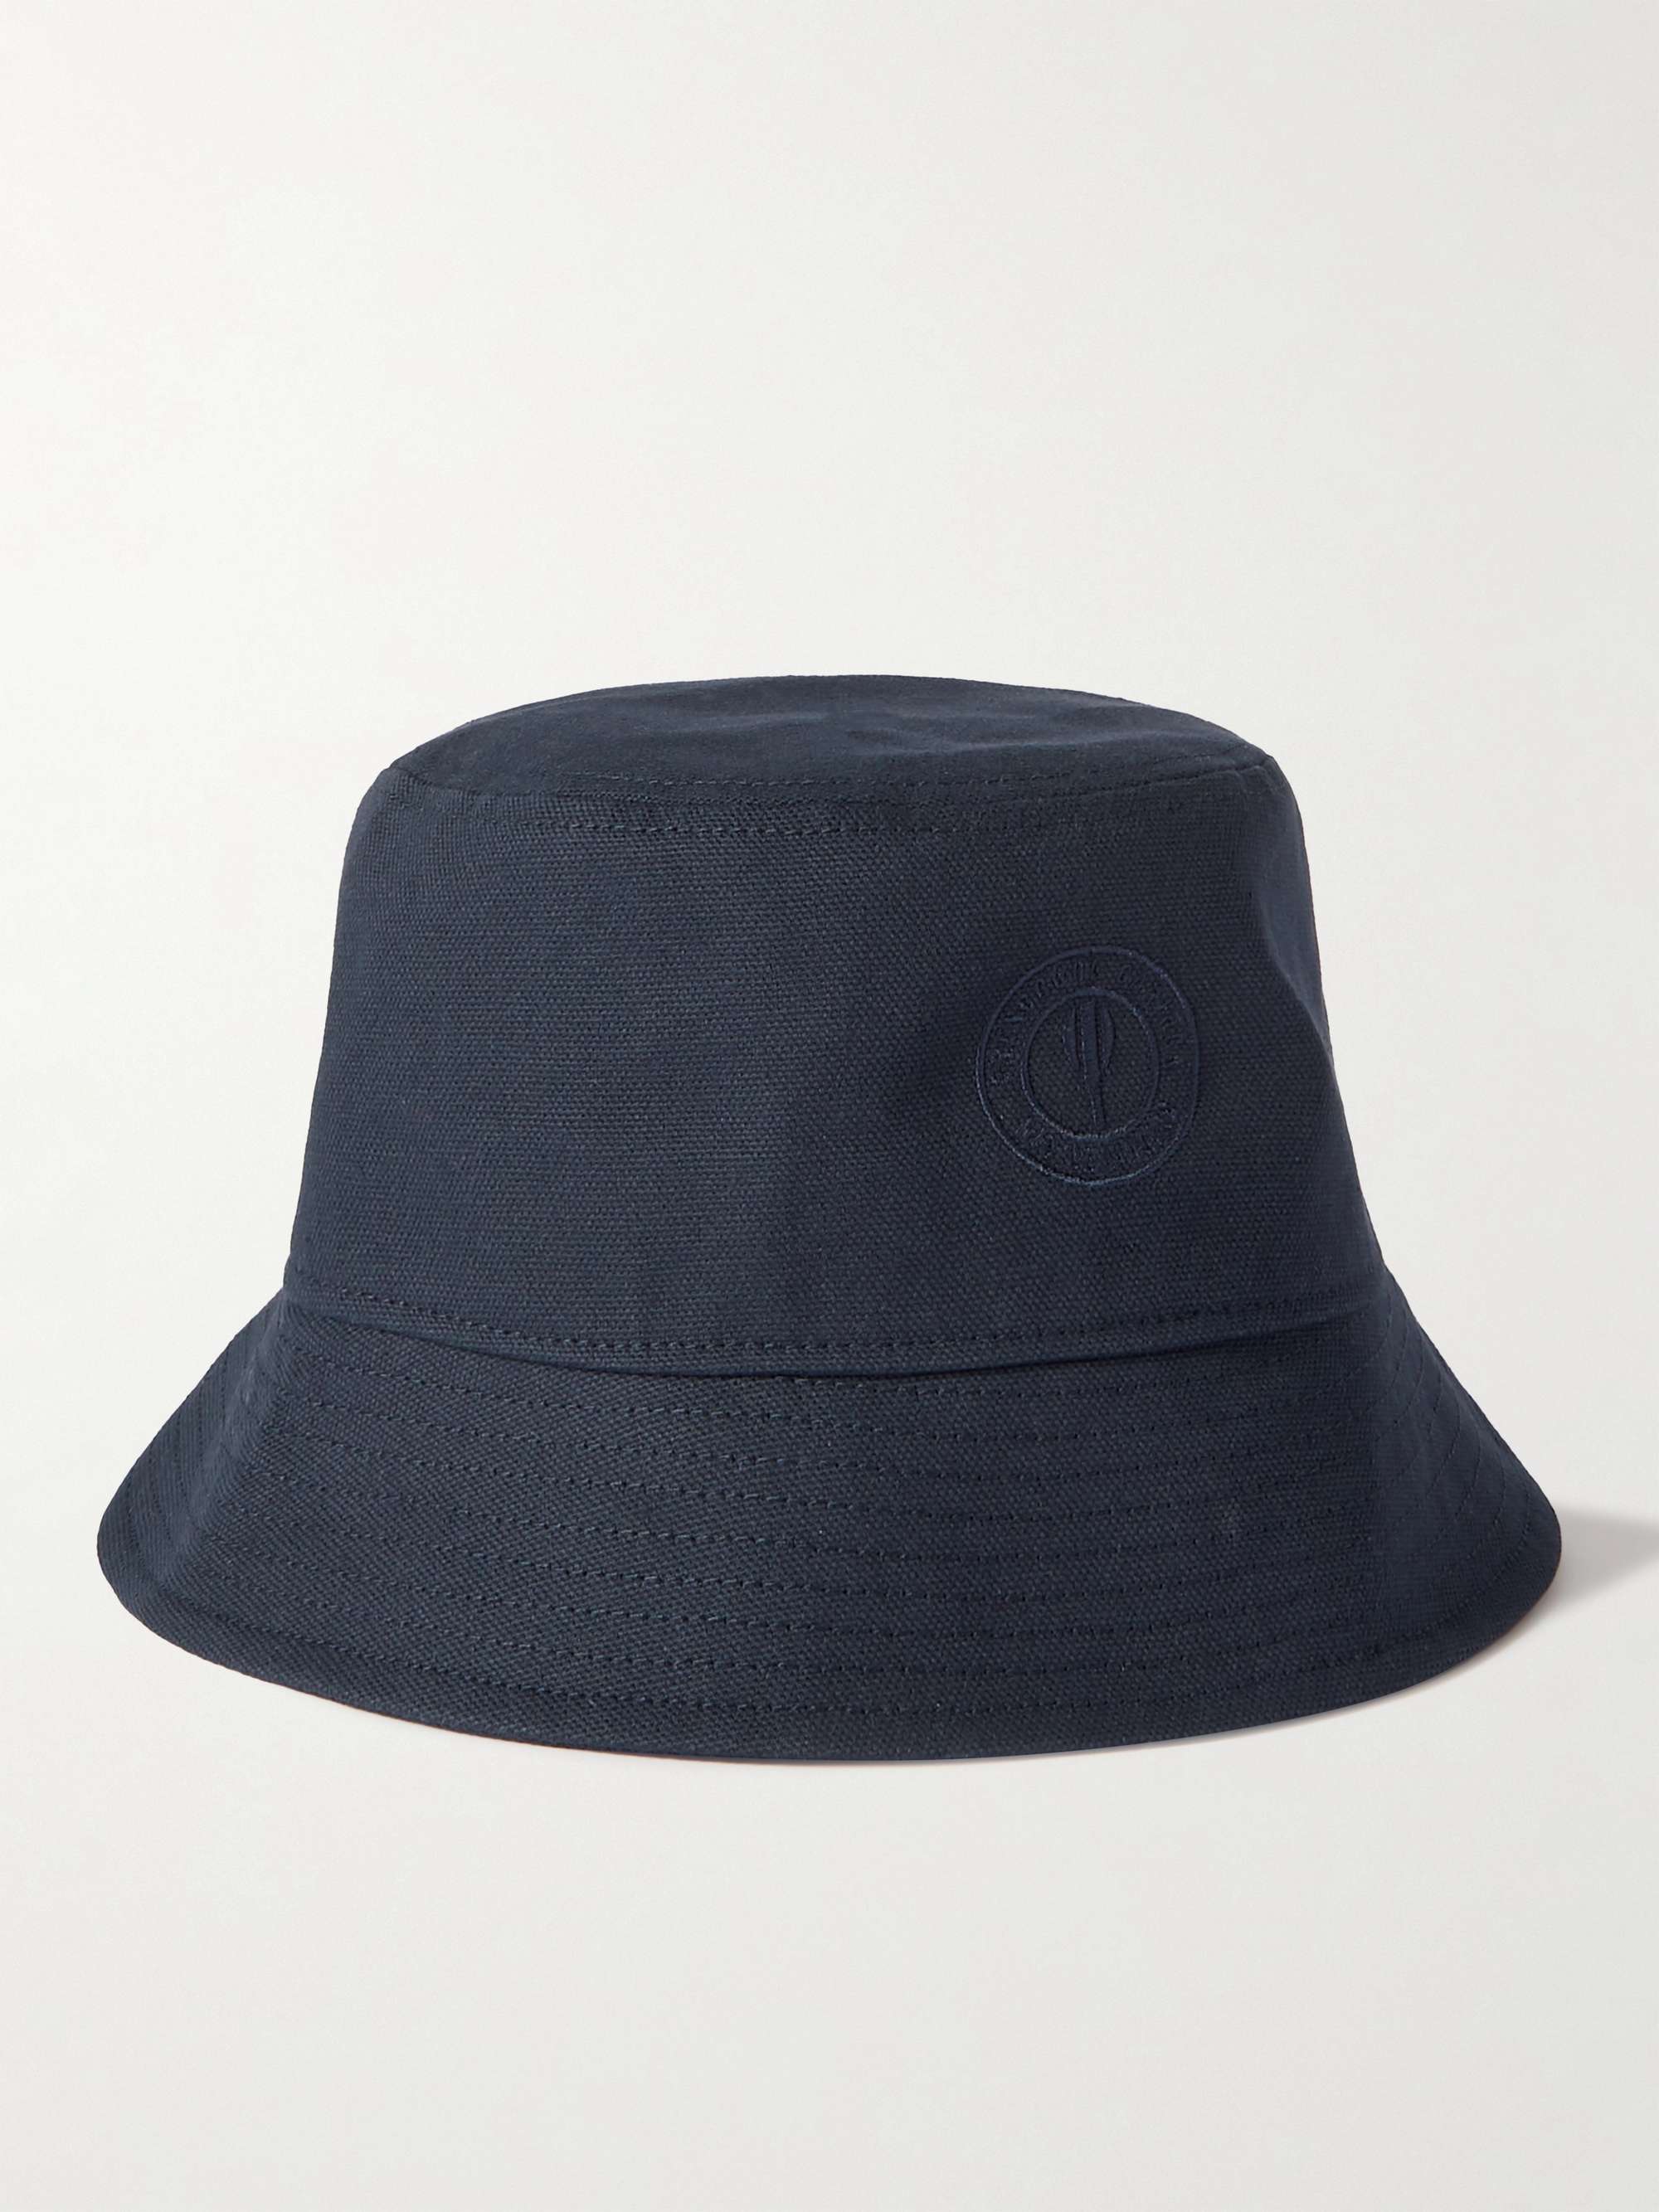 Navy Embroidered GORE-TEX Bucket Hat | NANAMICA | MR PORTER